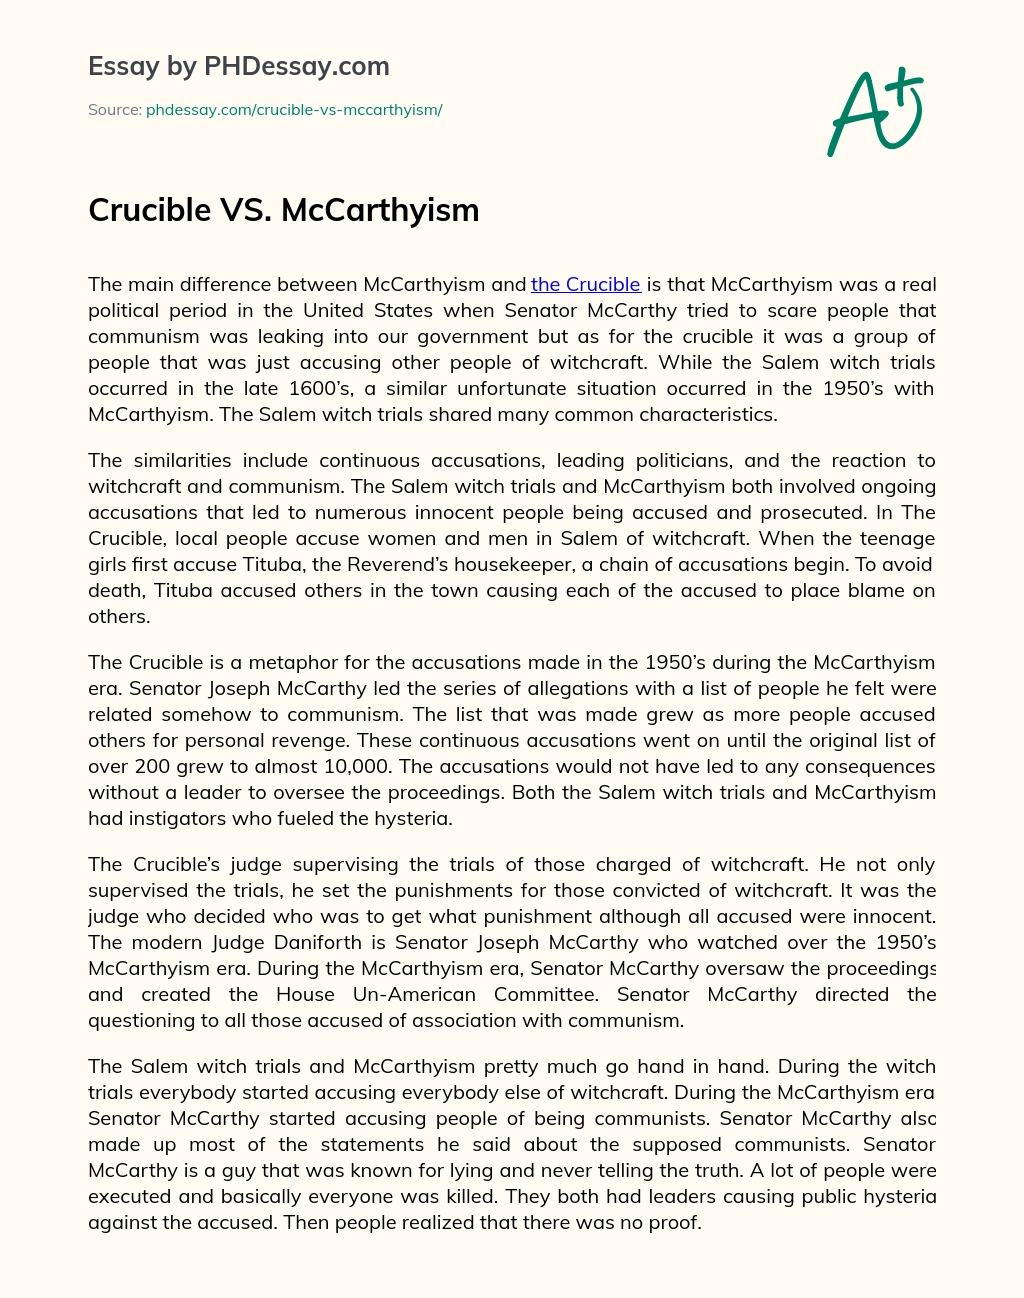 essay on the crucible and mccarthyism